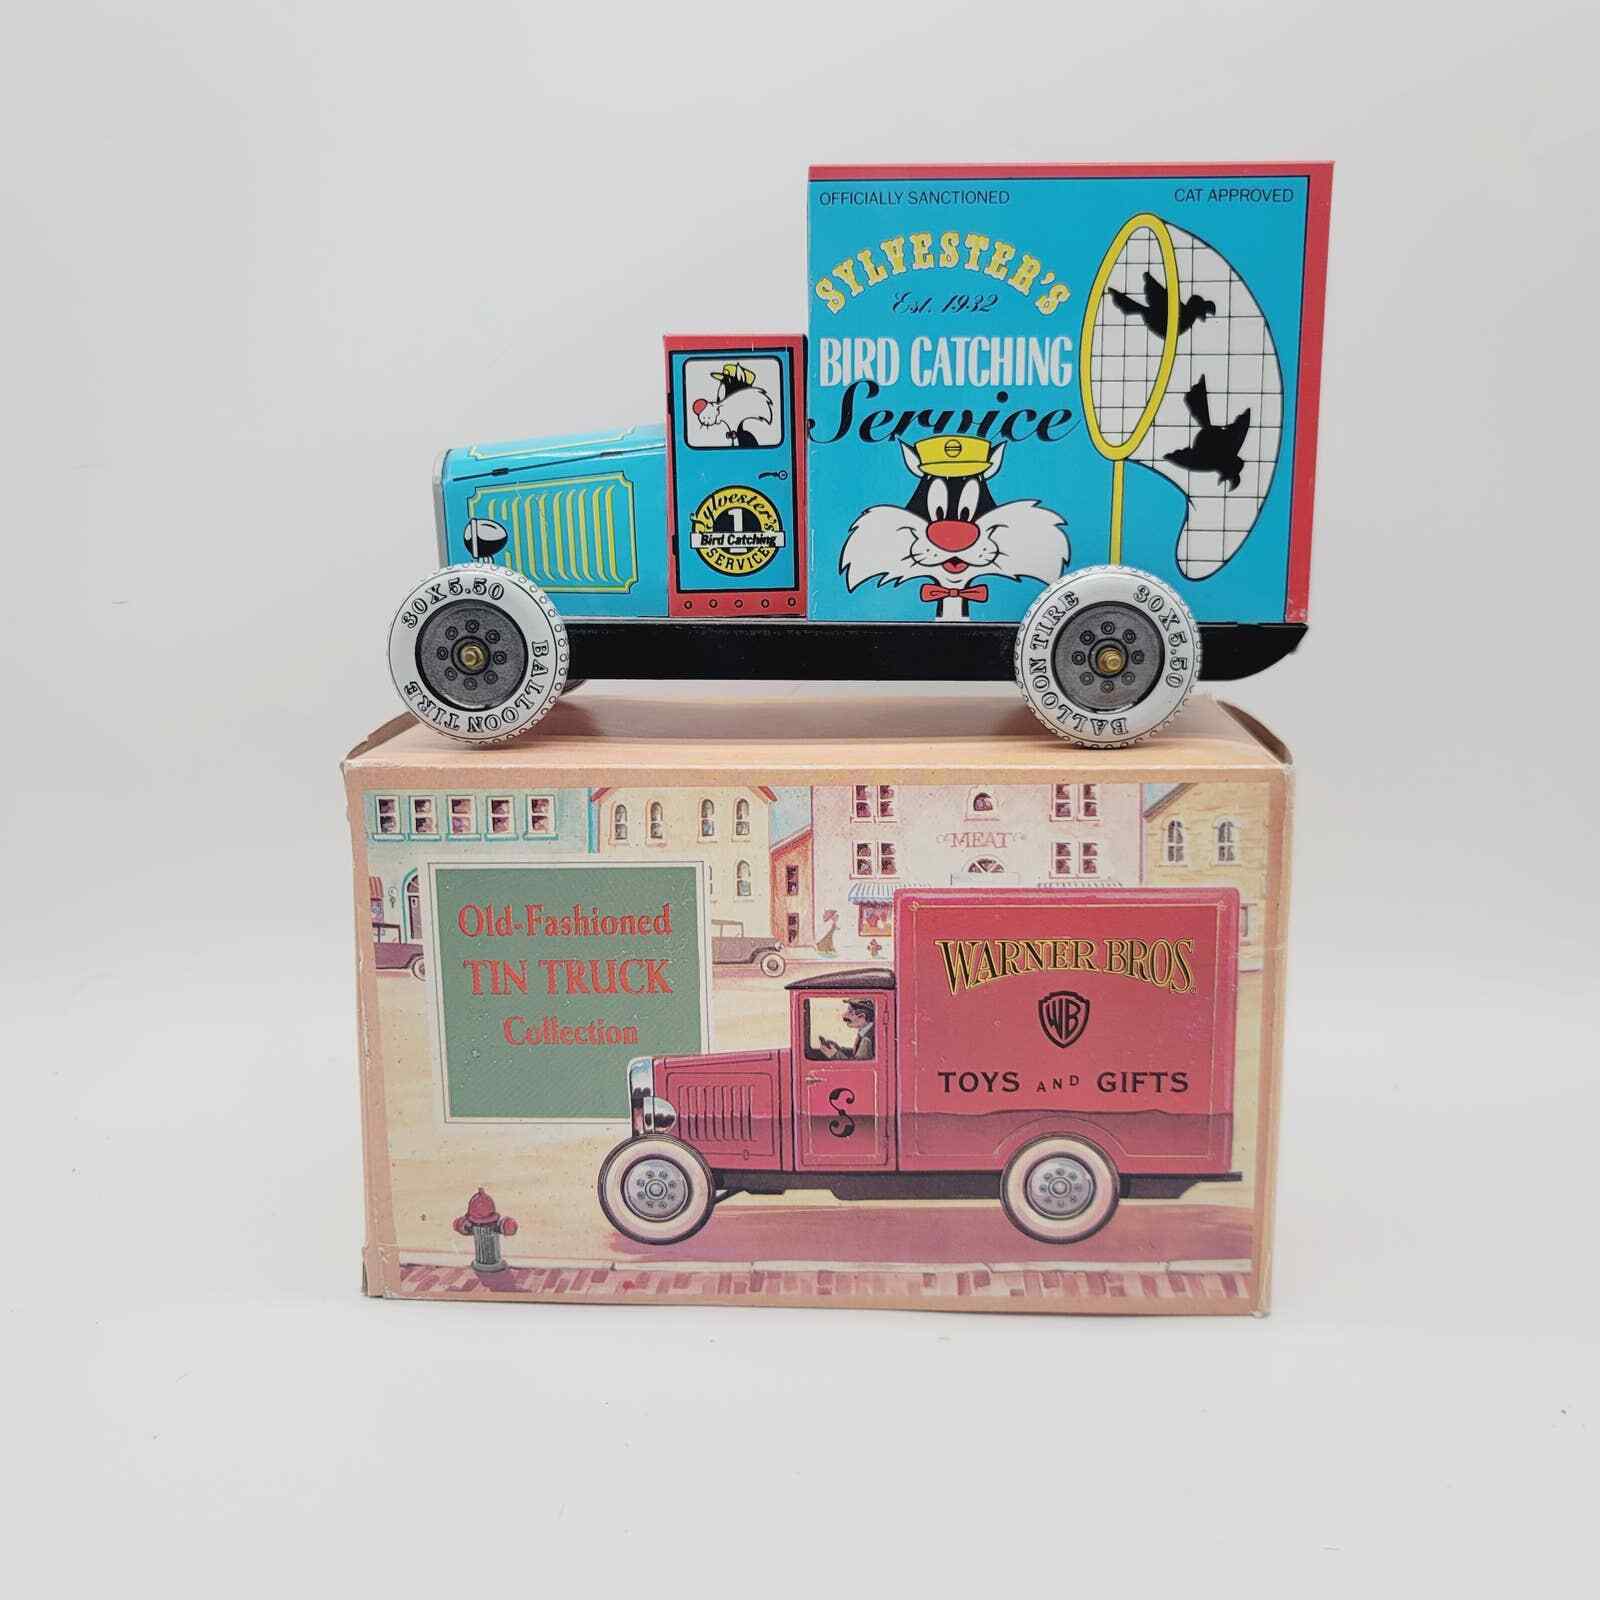 warner Bros. Old fashioned tin truck Sylvesters bird catching service truck